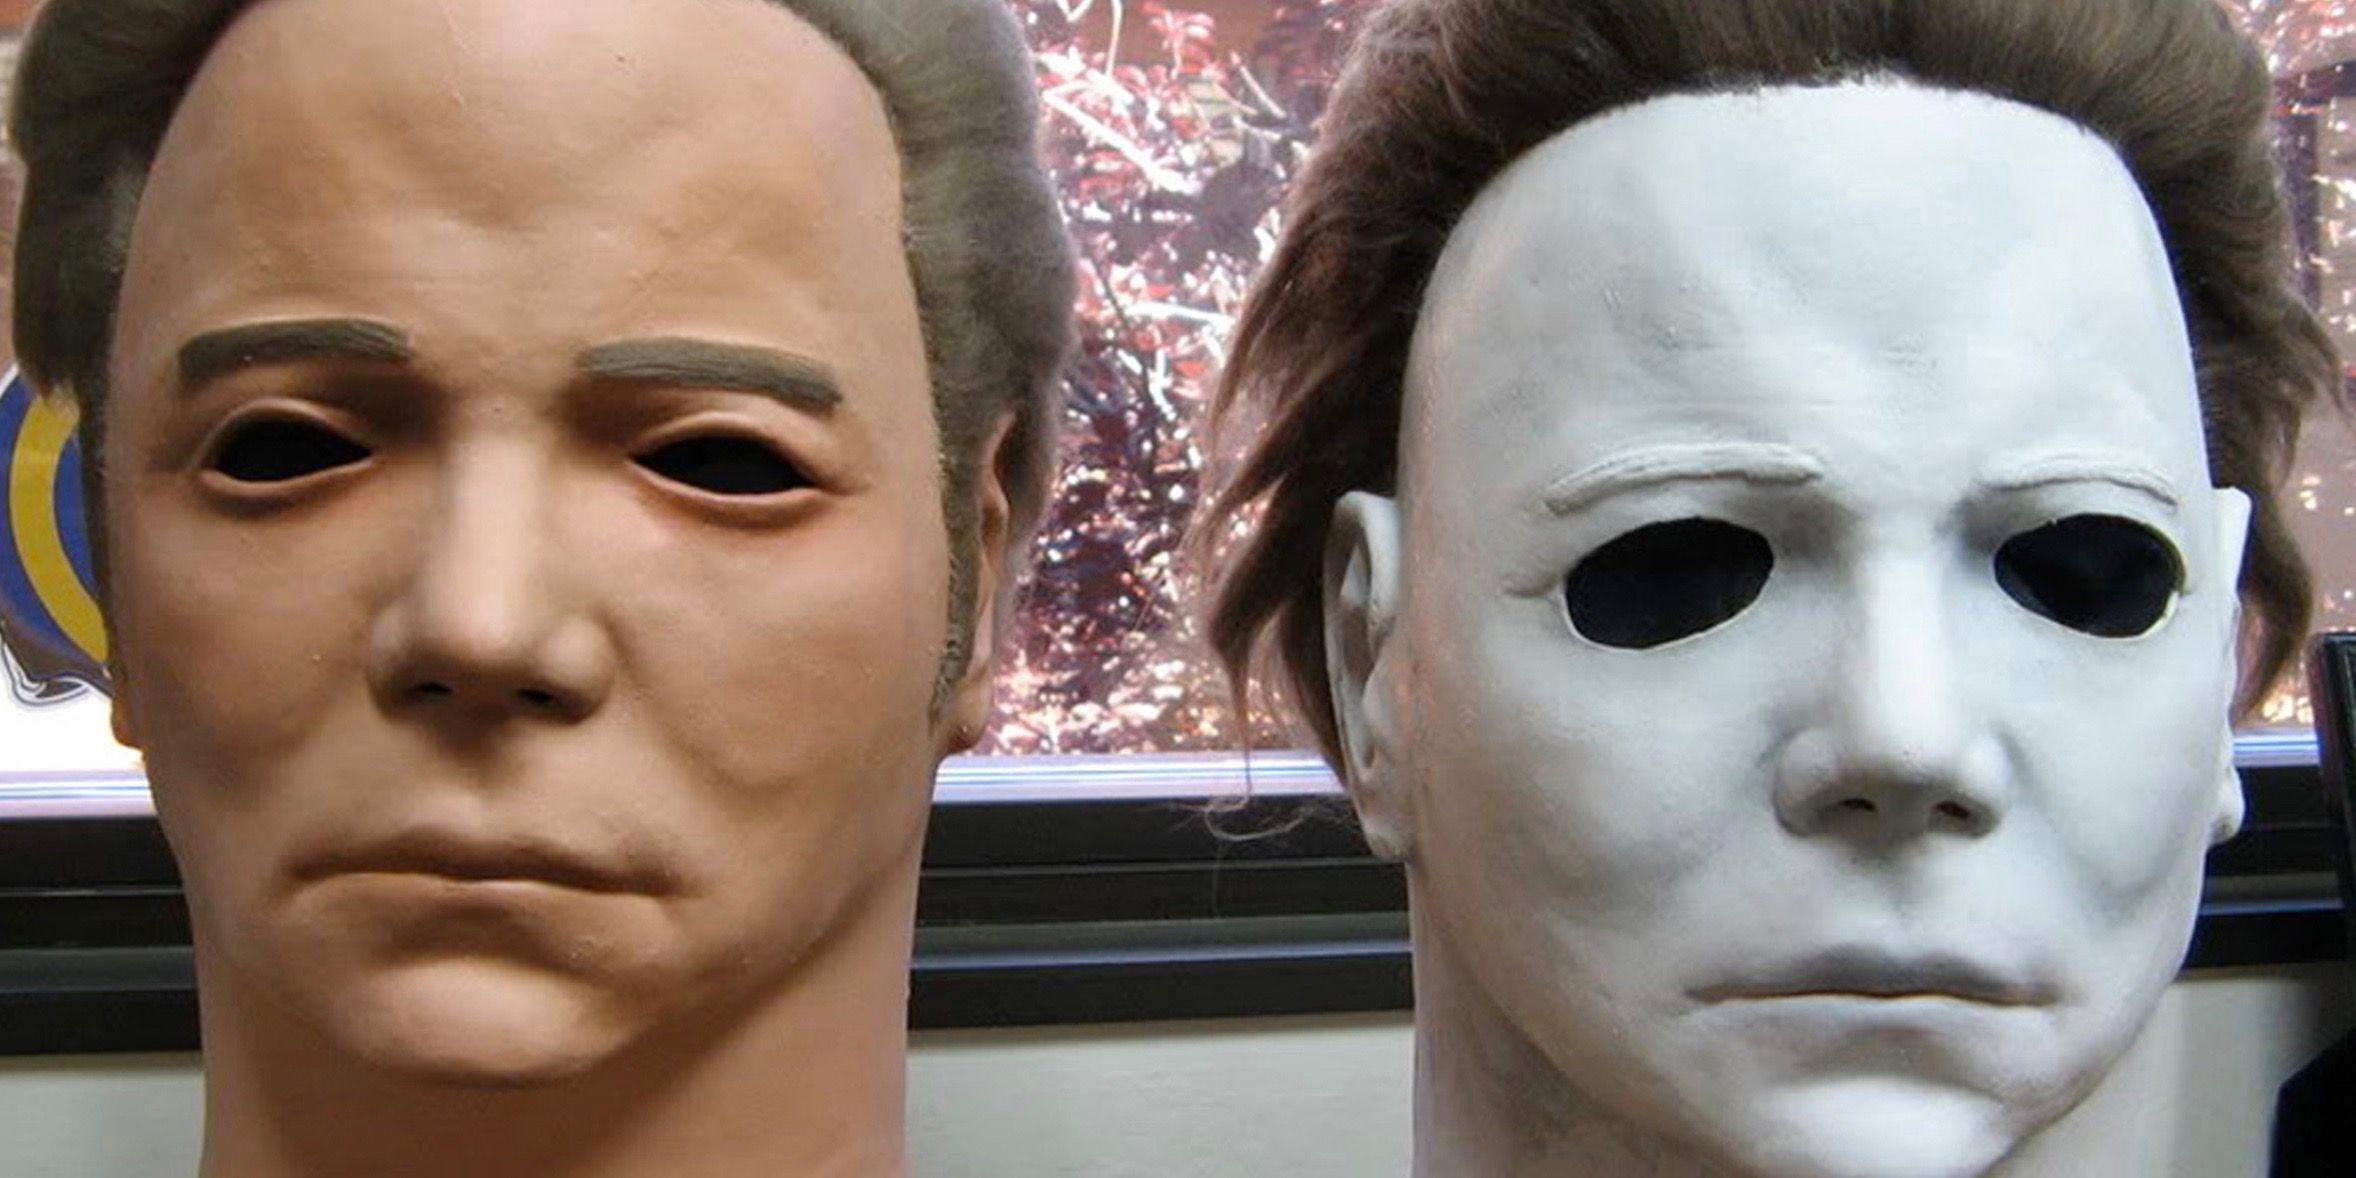 William-Shatner-and-Michael-Myers-Halloween-Mask-Comparison